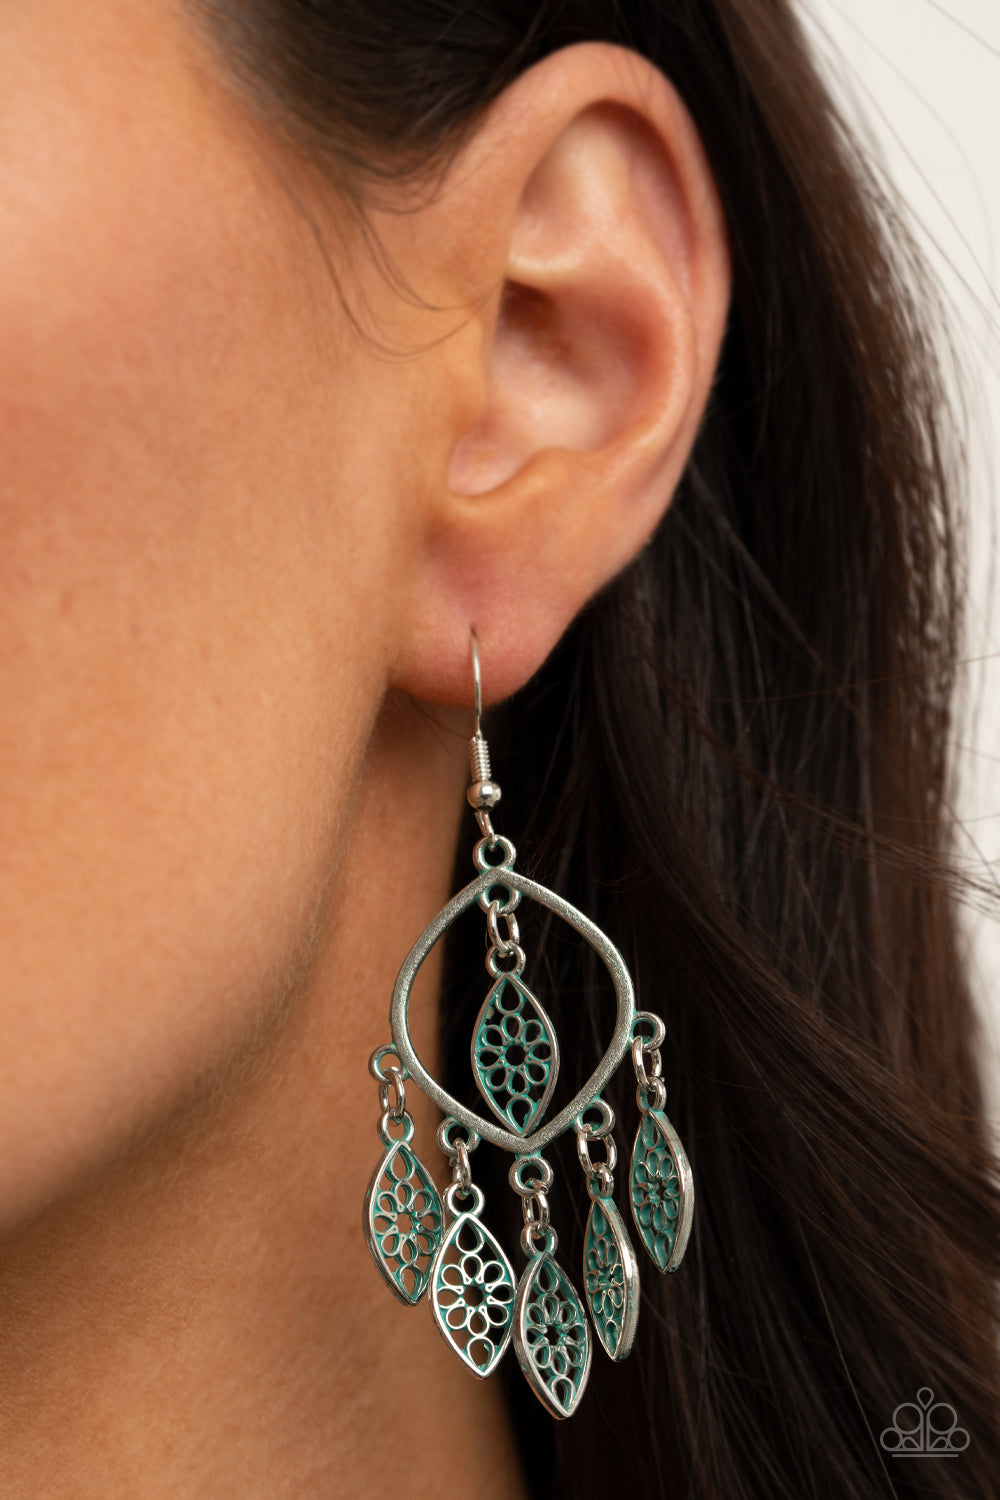 Paparazzi Jewelry & Accessories - Artisan Garden - Silver Earrings. Bling By Titia Boutique